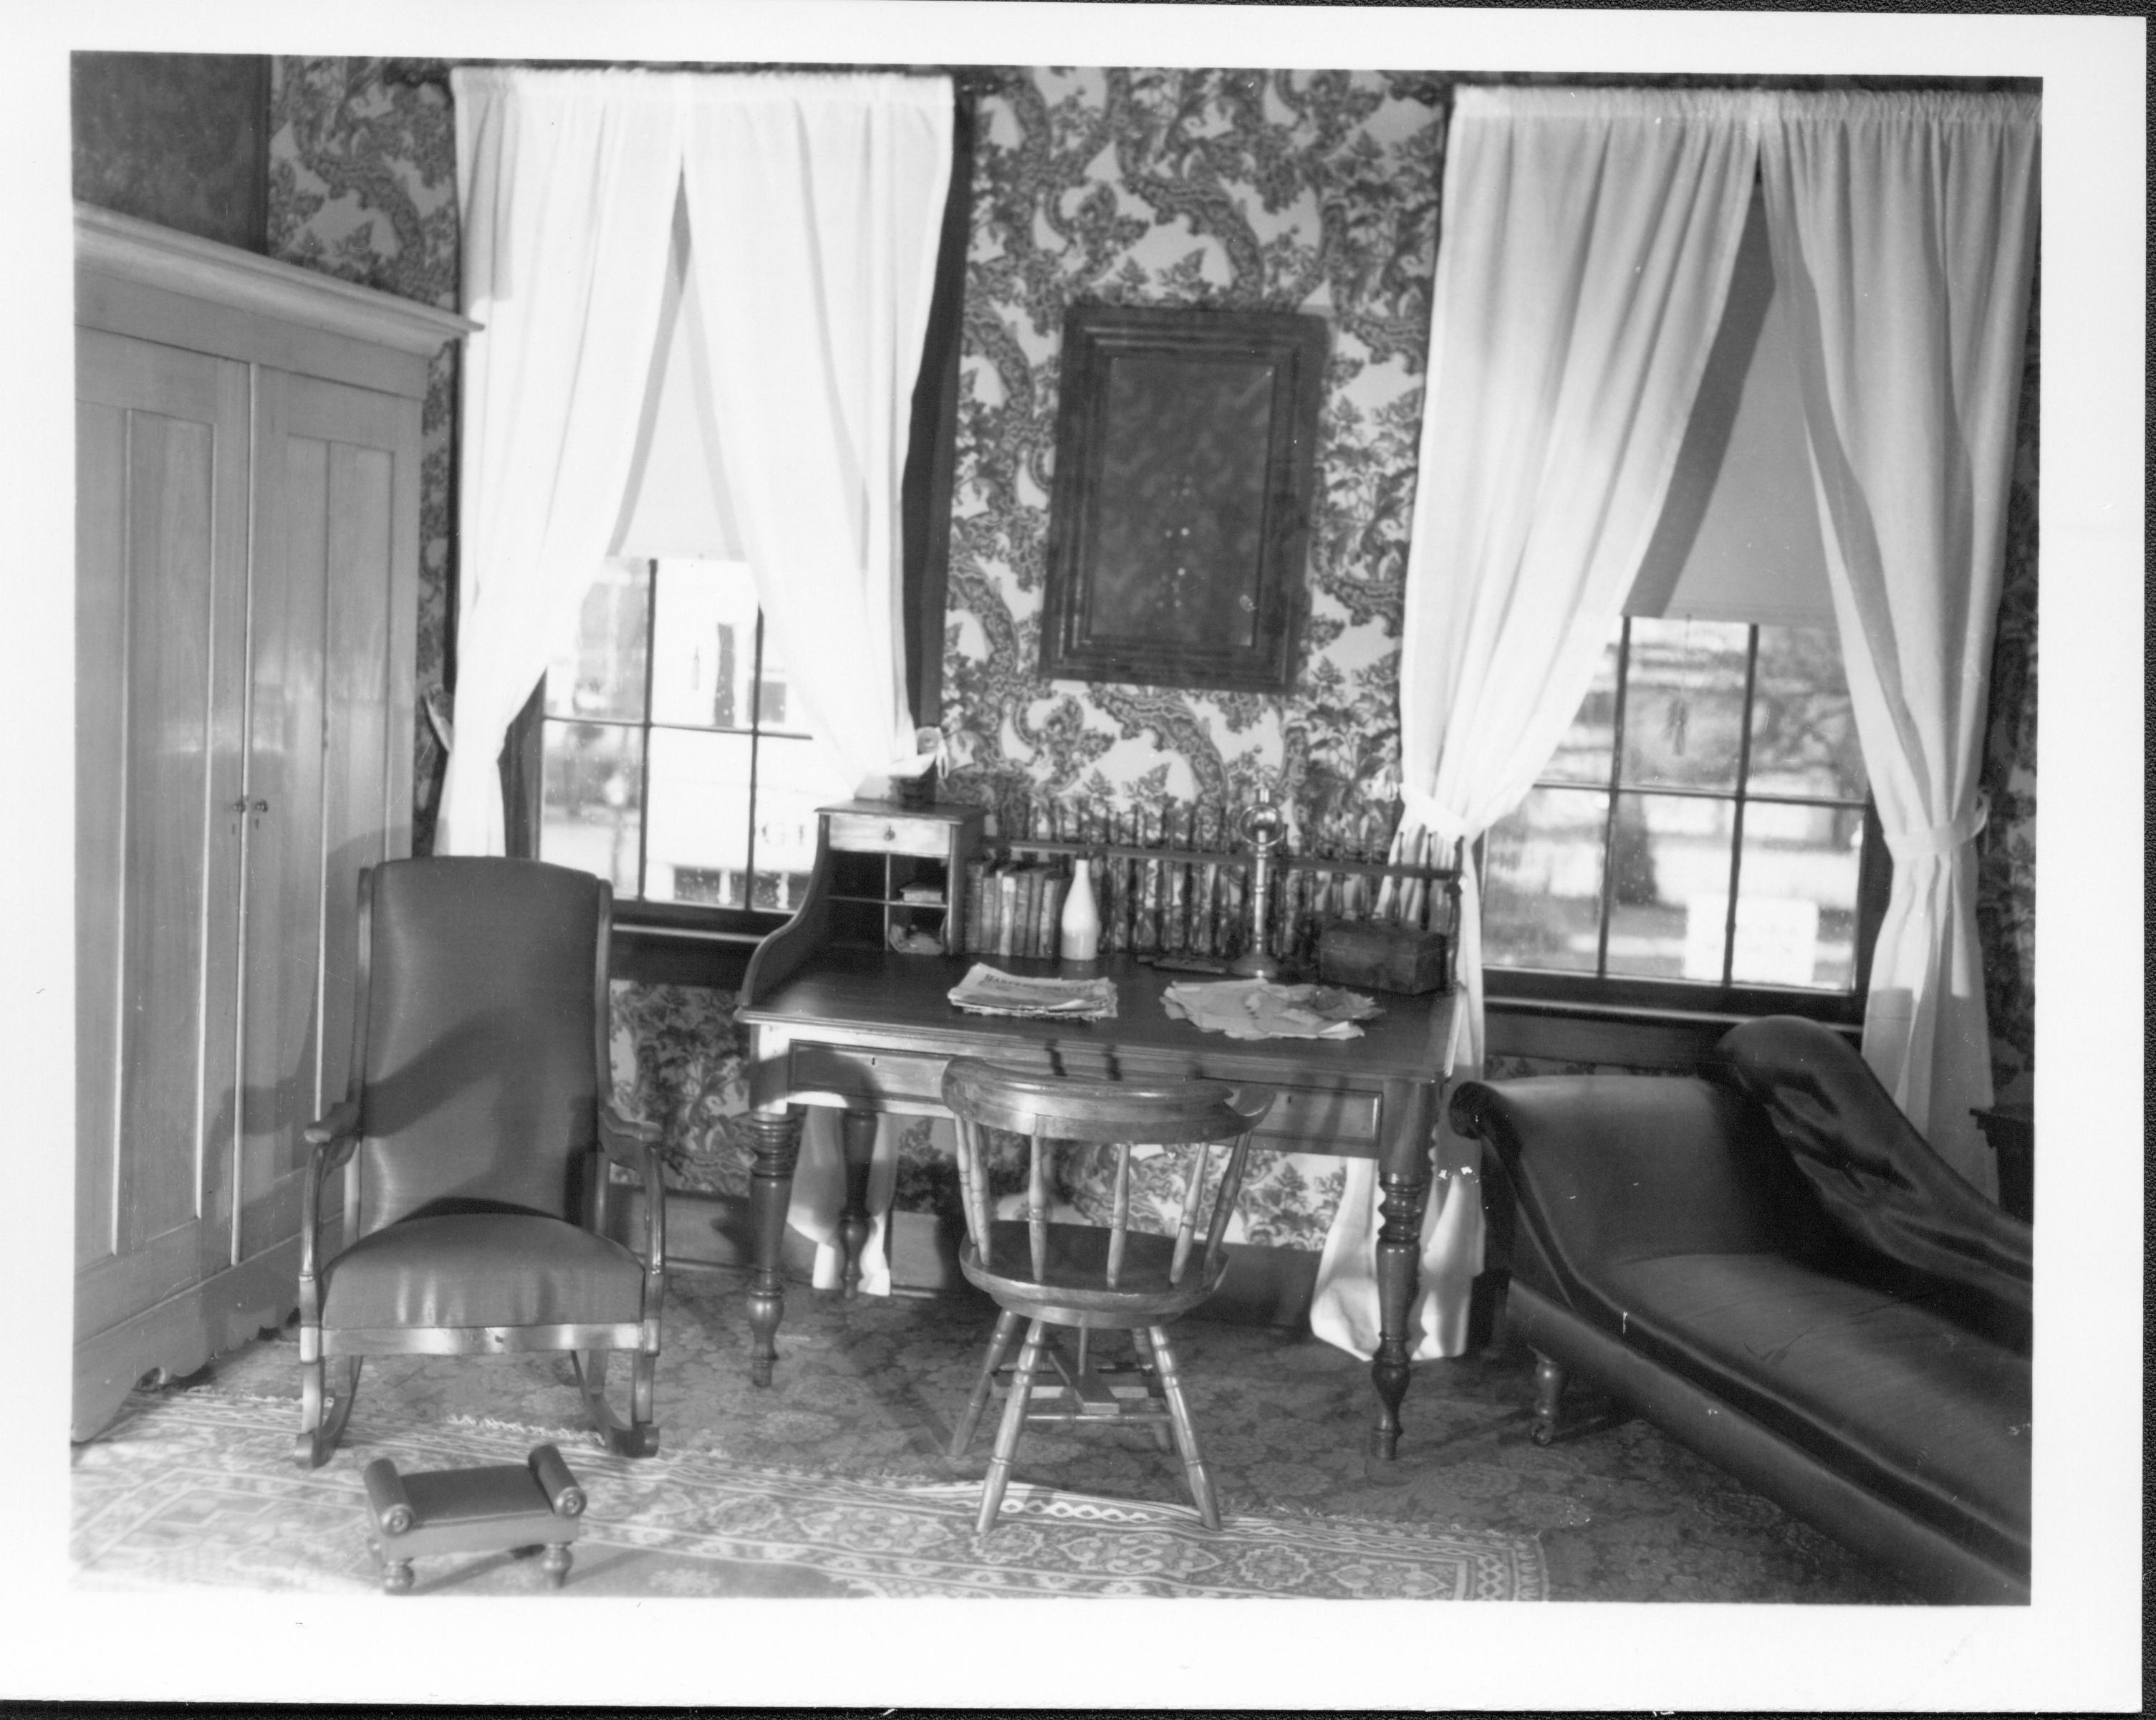 Spindle Desk - Lincoln's Home class 1, picture 20 Lincoln Home, Bedroom, wardrobe, rocking chair, spindle table, chaise, windows